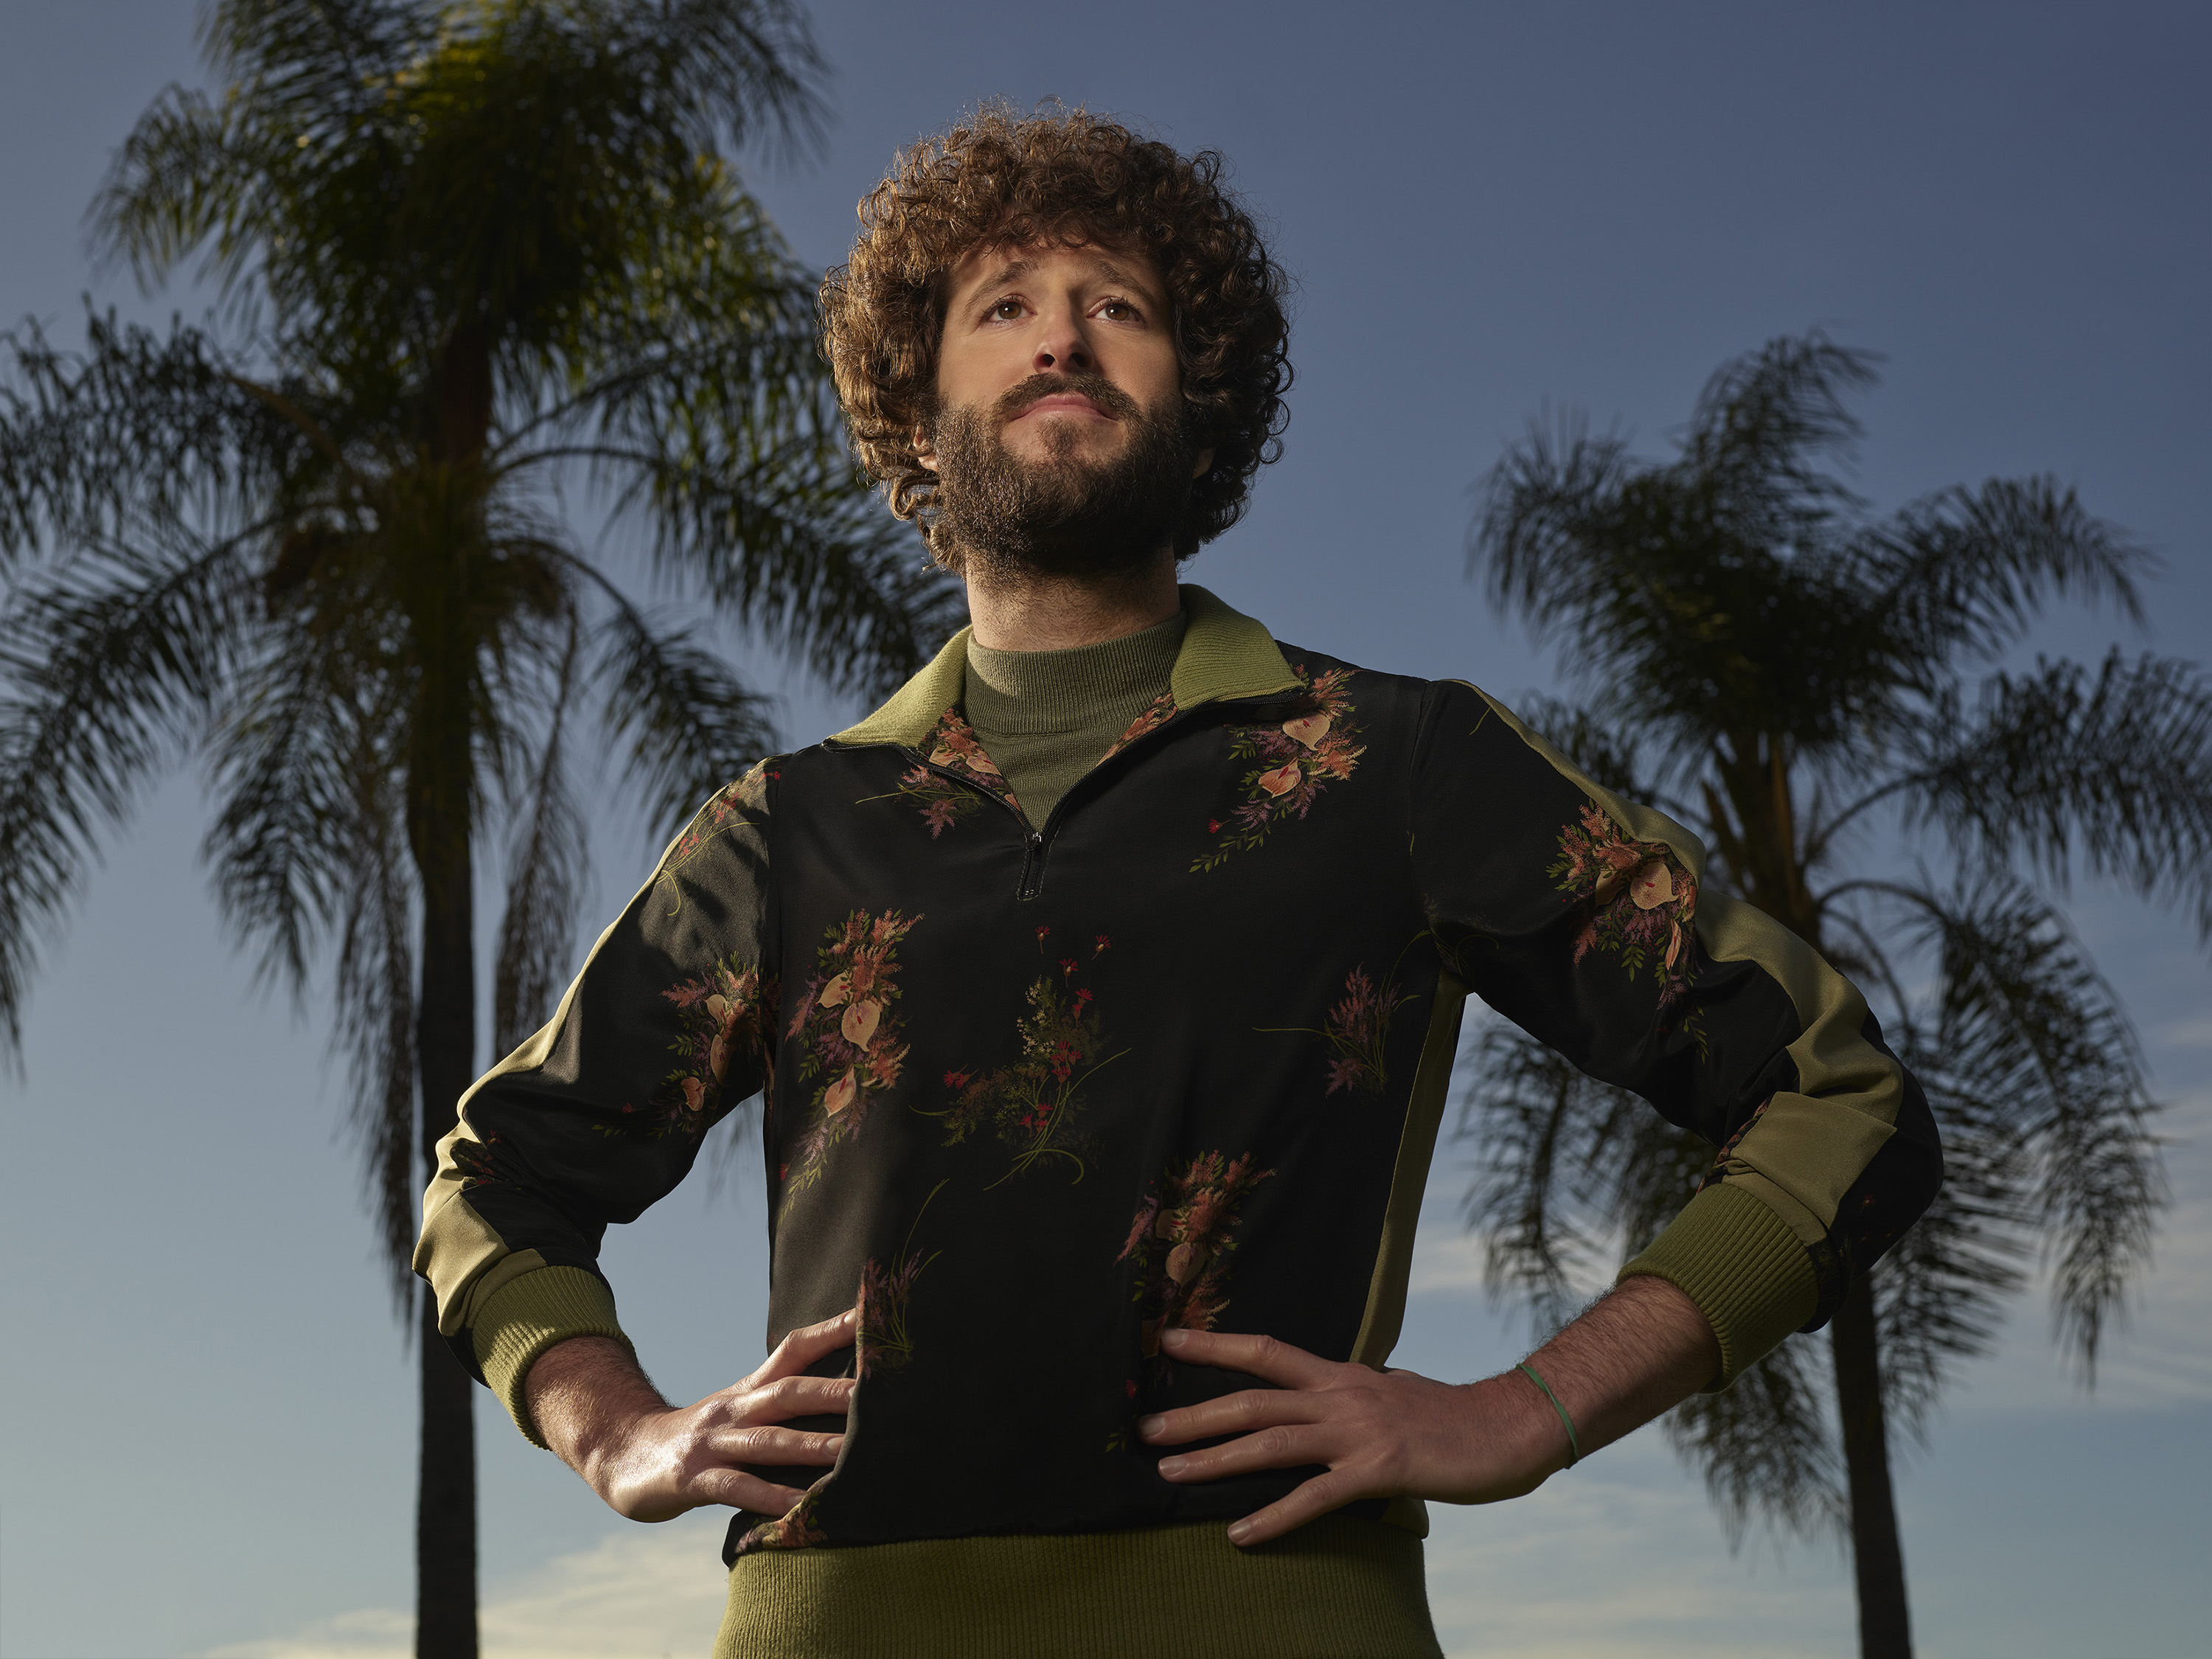 Dave 'Lil Dicky' Burd posing with his hands on his hips in front of palm trees for the FX series 'Dave'. He'll reprise his role in 'Dave' Season 3.